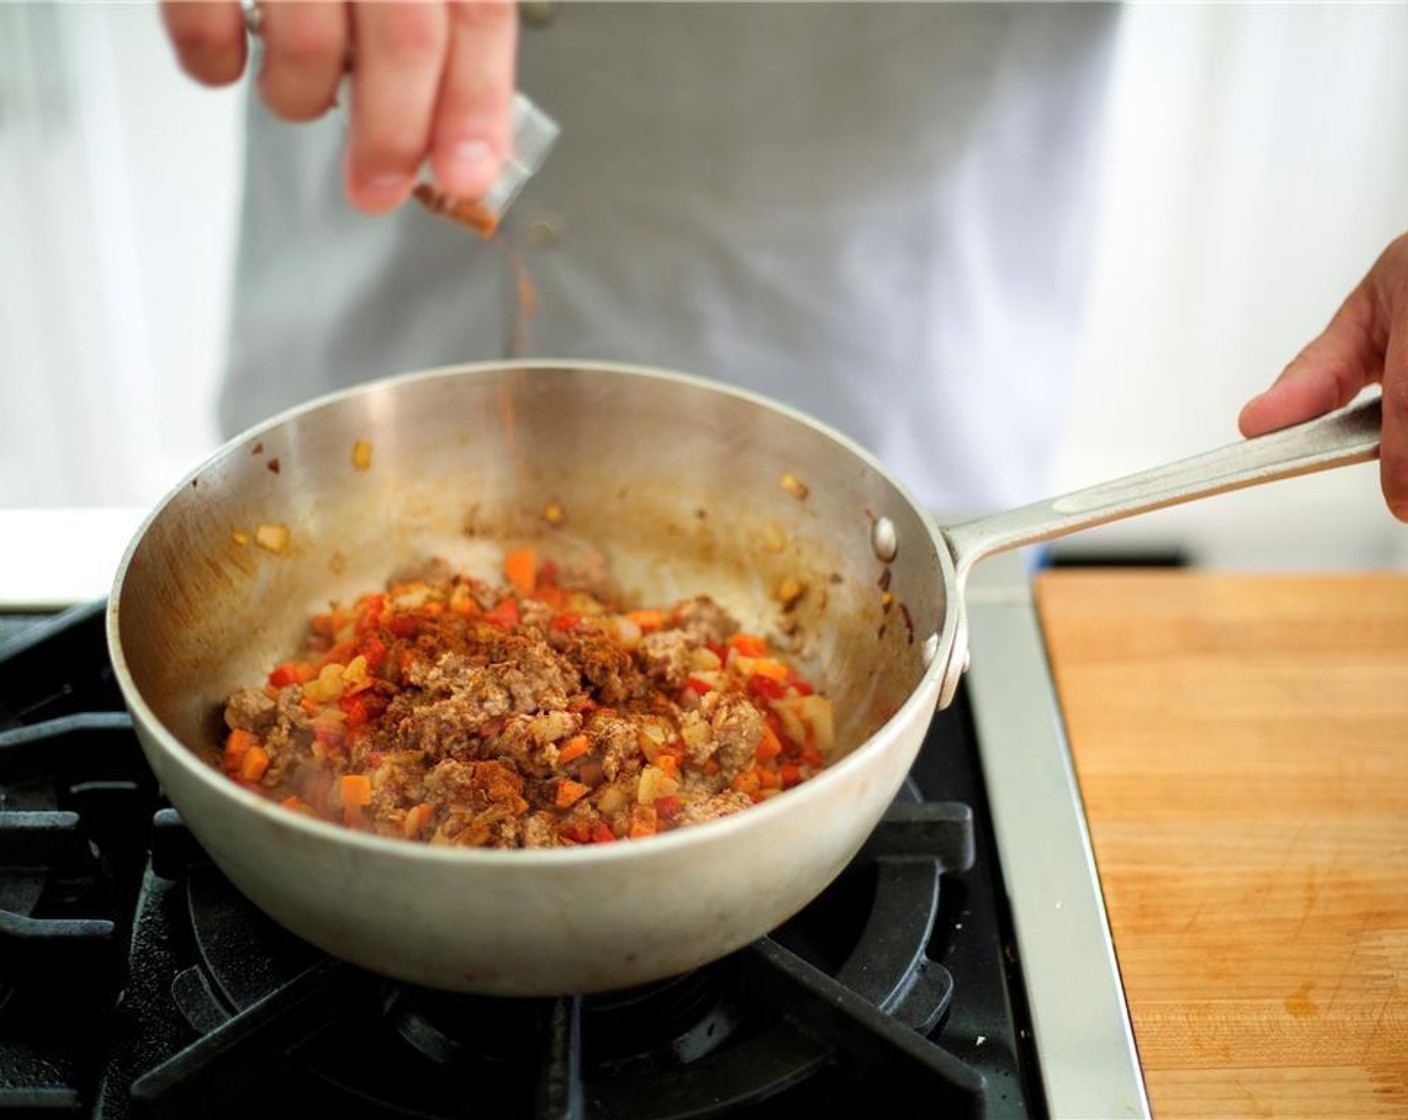 step 4 Break up the Ground Beef (8 oz) into small chunks with your hands and add to the pot; cook for 5 minutes, until the beef is mostly cooked.